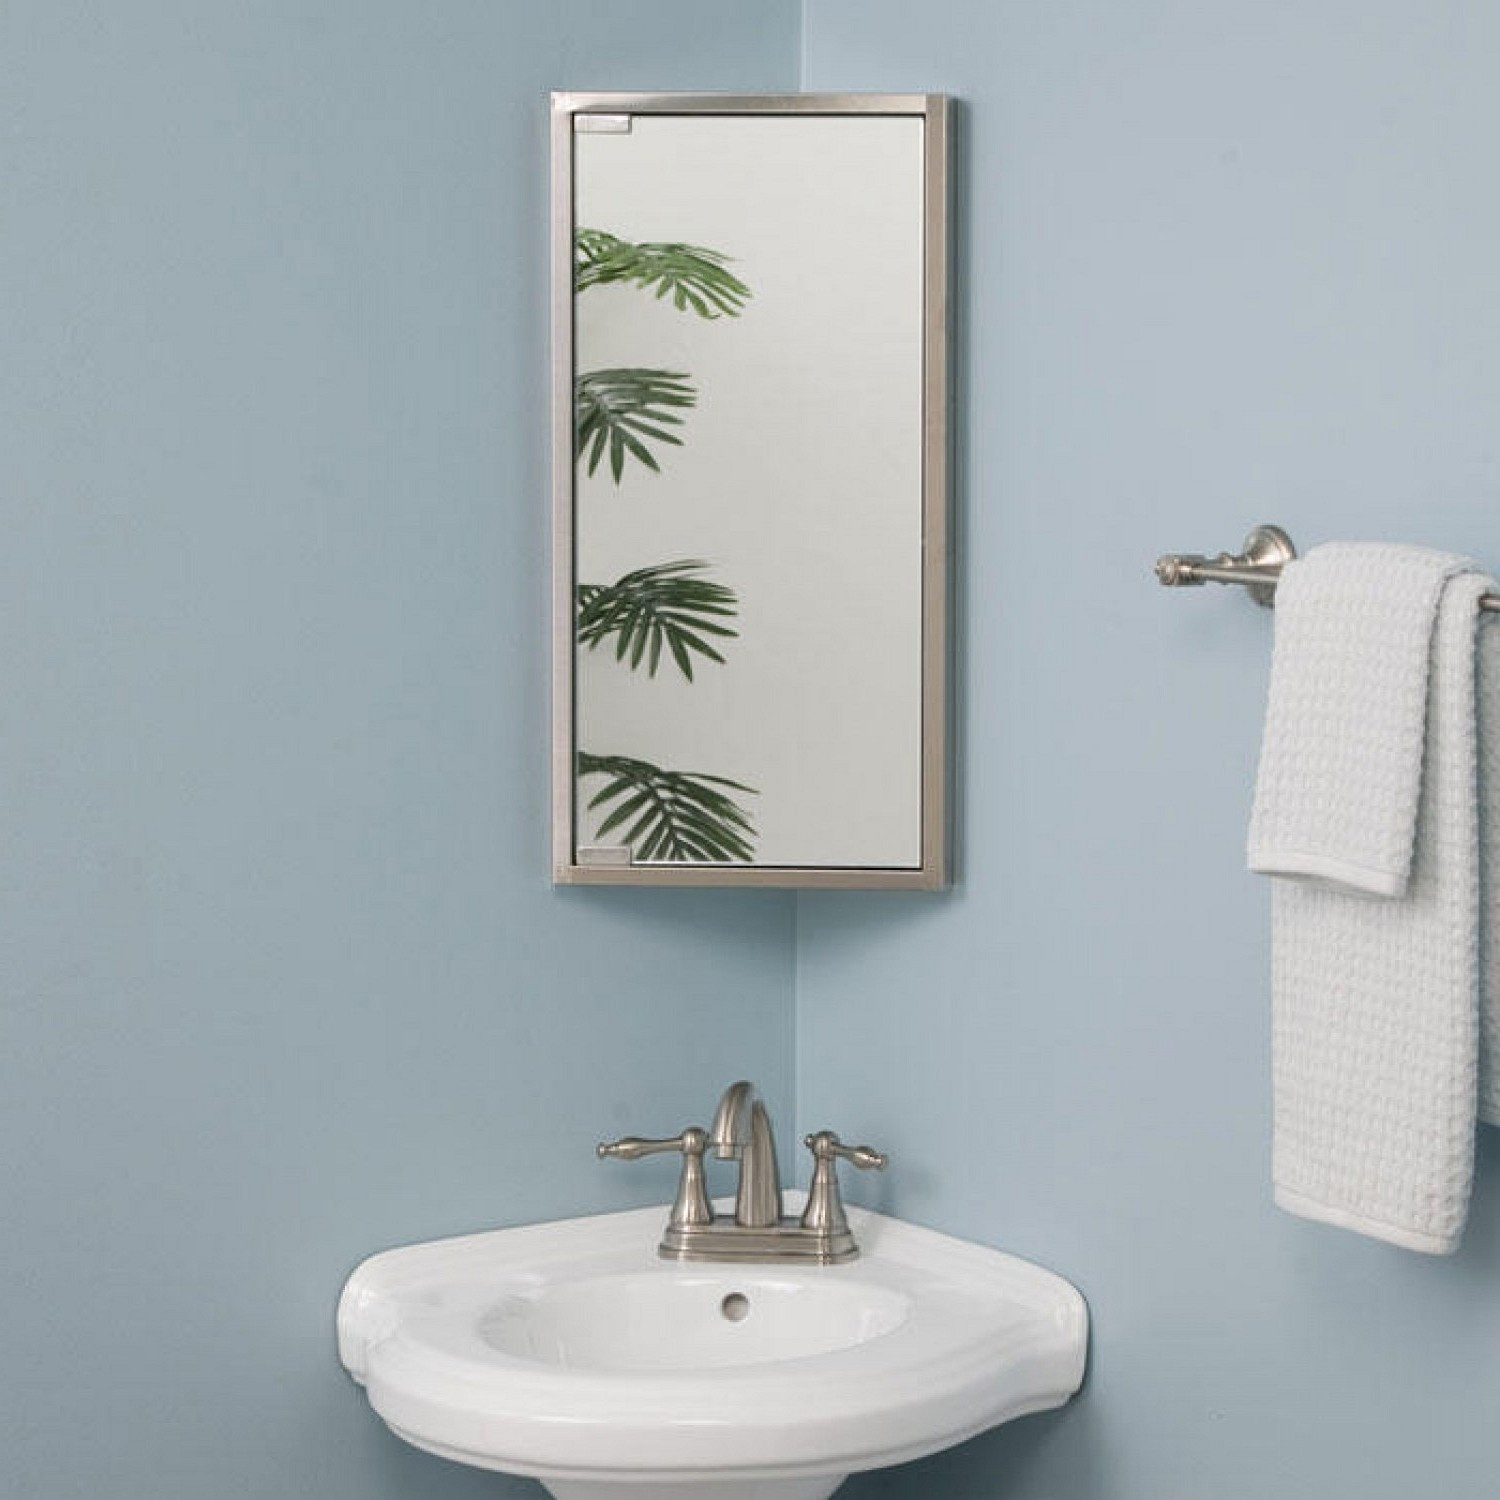 Bathroom Mirror Lowes
 Decoration Gorgeous Mirrors Lowes With Fancy D Frames For